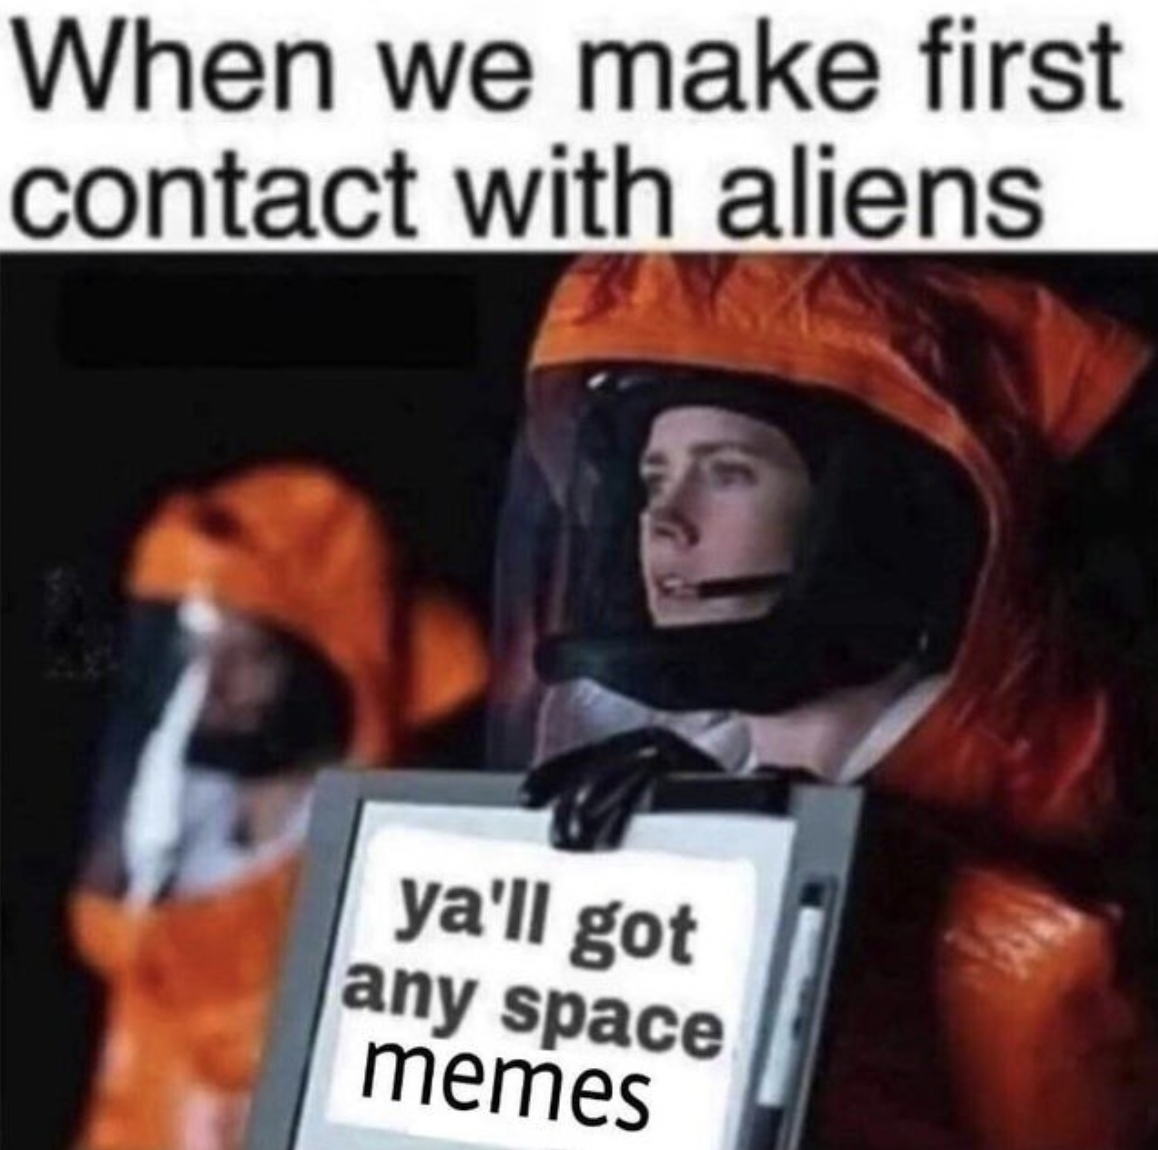 space memes - When we make first contact with aliens ya'll got any space memes